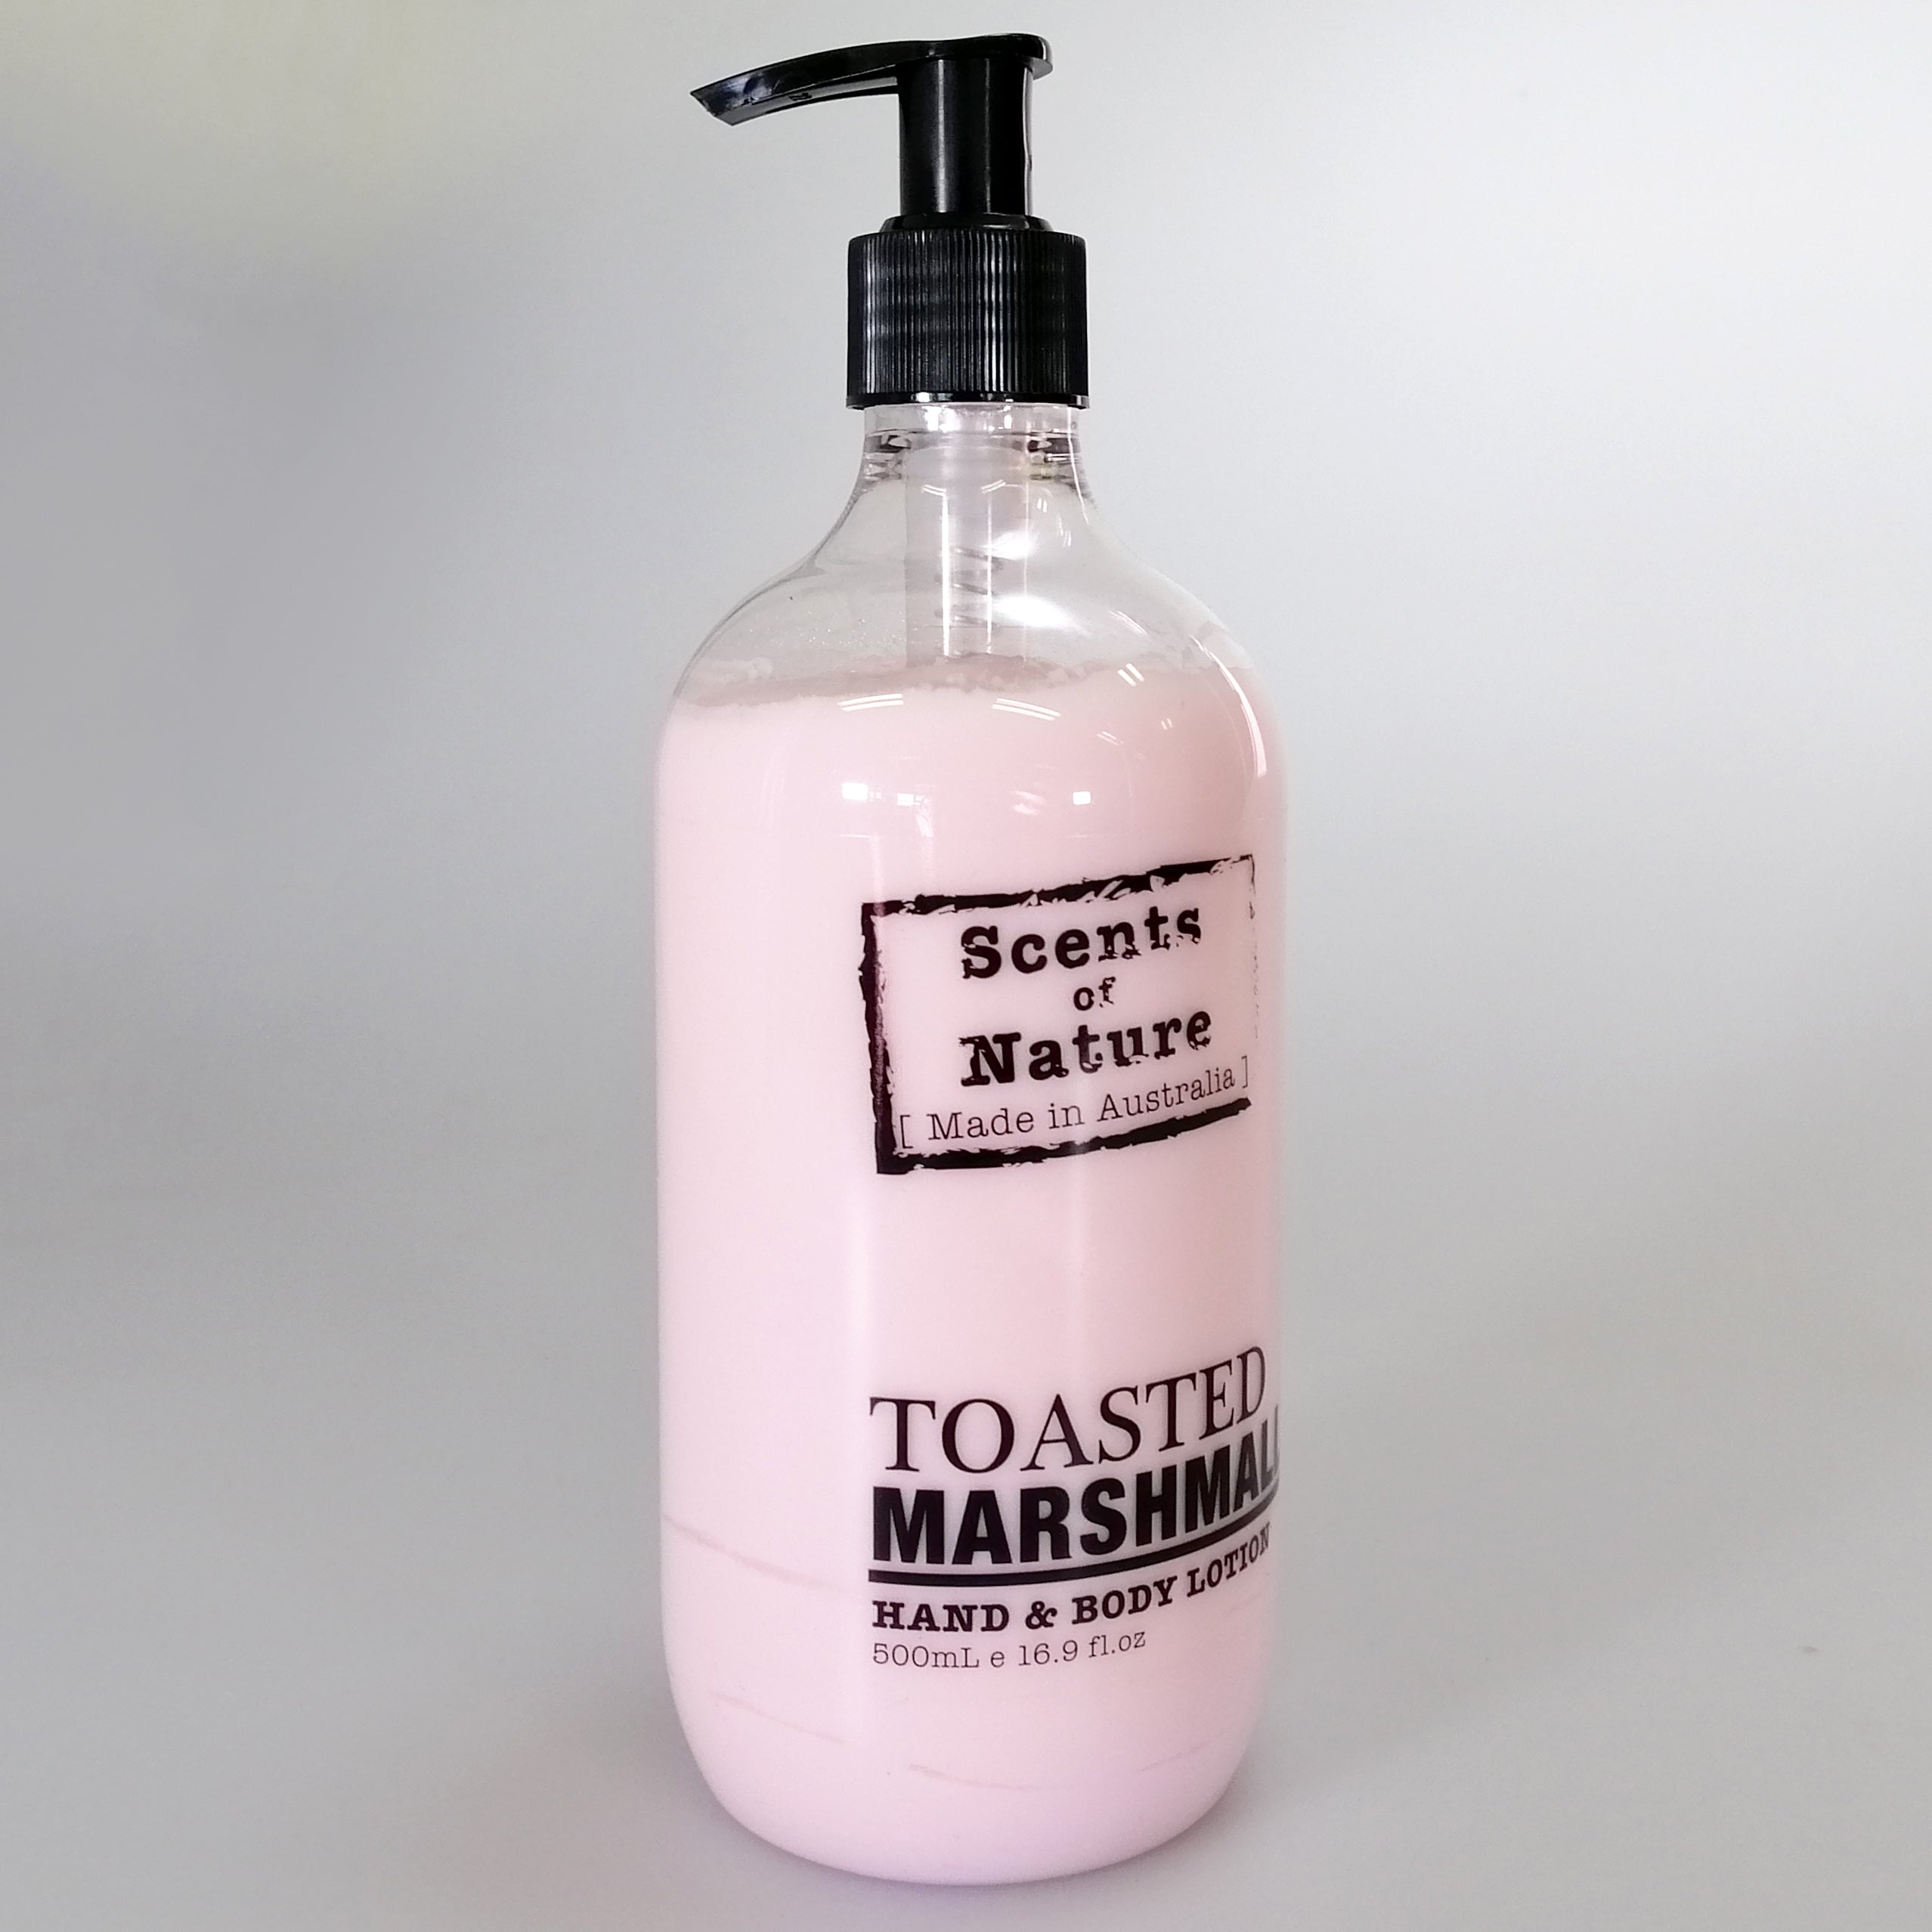 Hand & Body Lotion - Toasted Marshmallow - 500ml